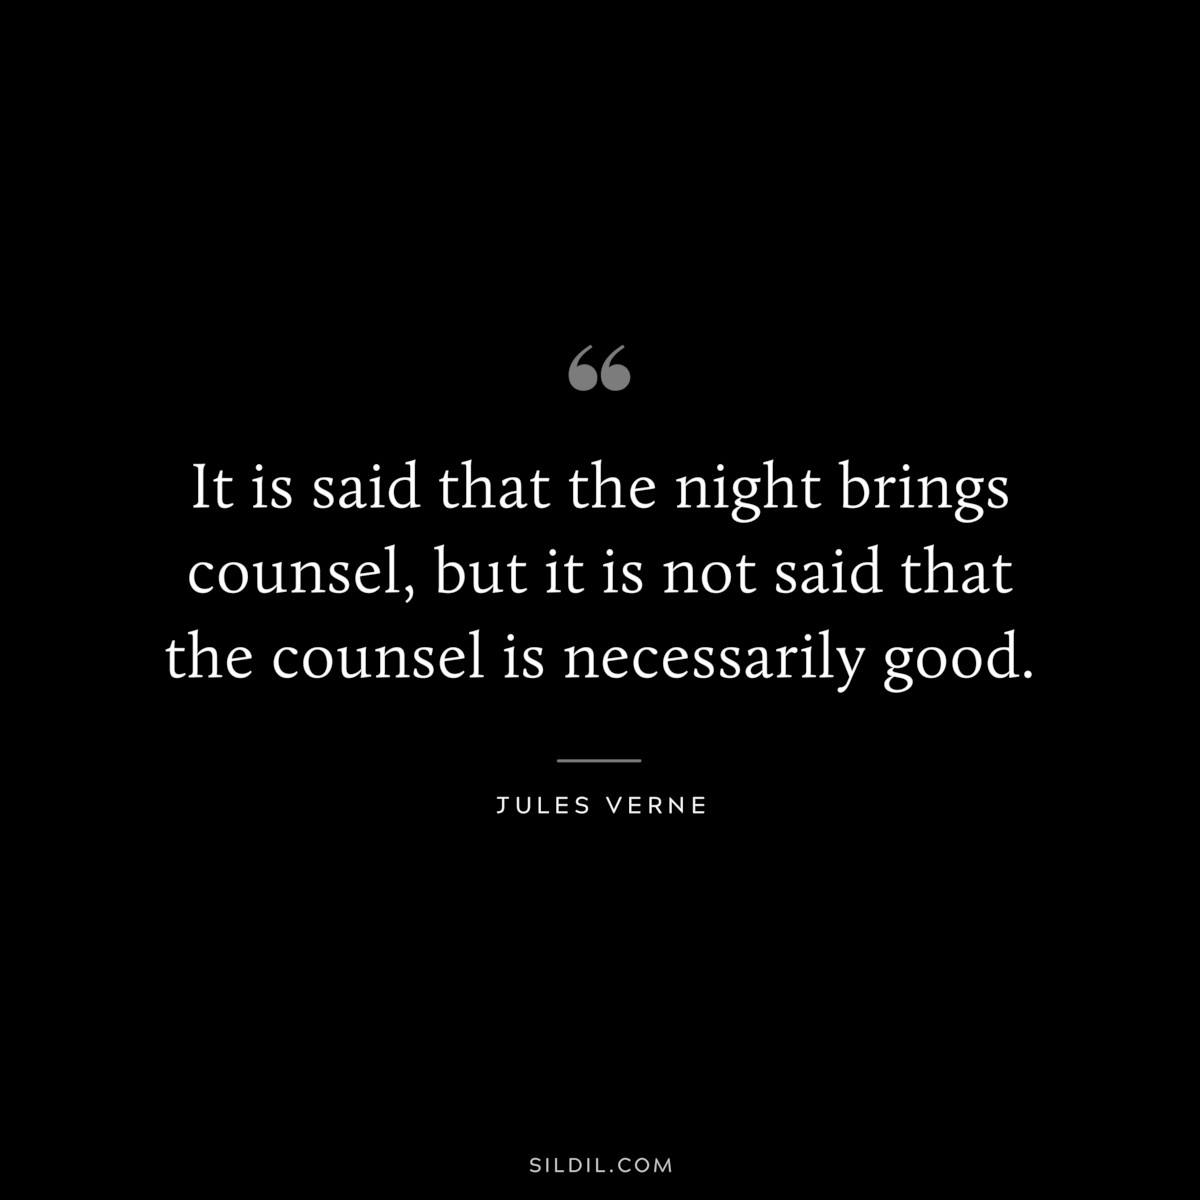 It is said that the night brings counsel, but it is not said that the counsel is necessarily good.